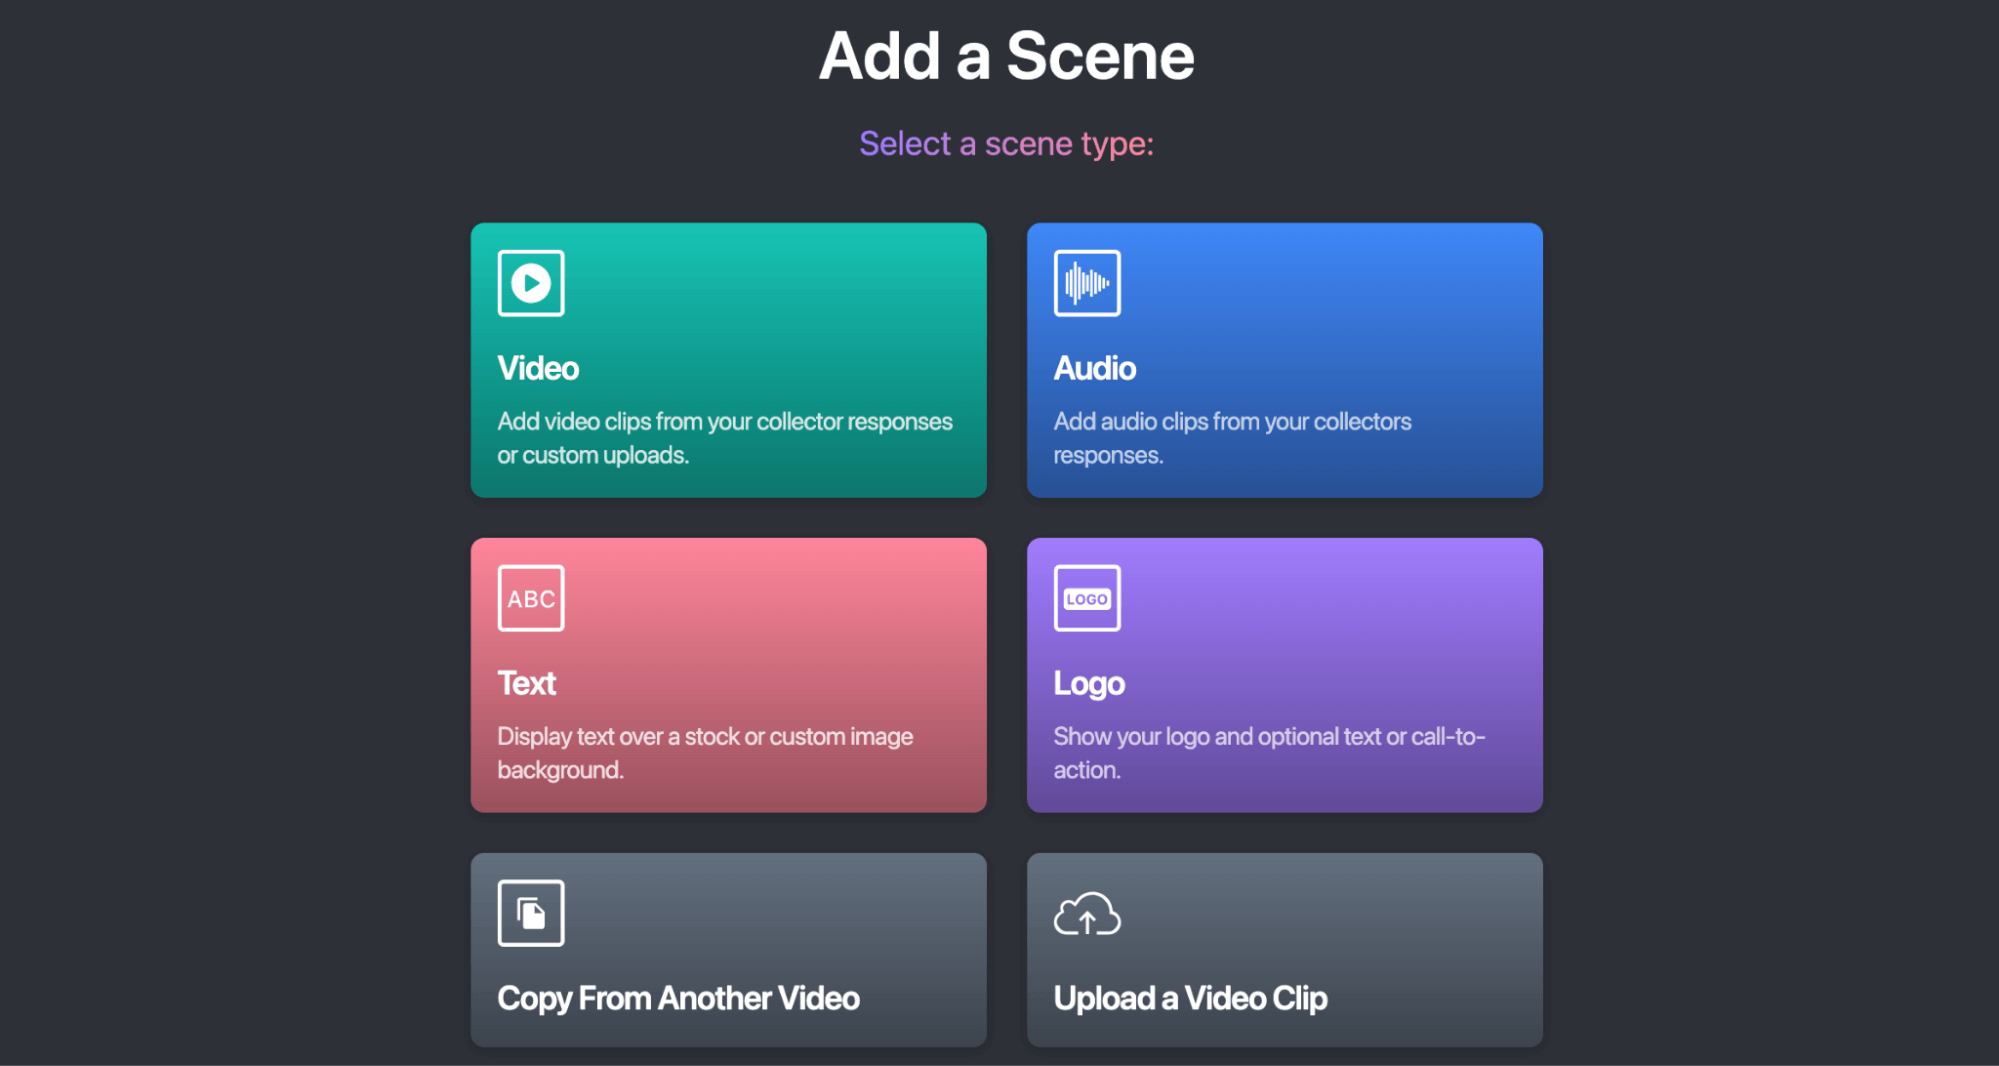 Add a Scene: Video, Audio, Text, Logo, Copy from Another Video, Upload a Video Clip